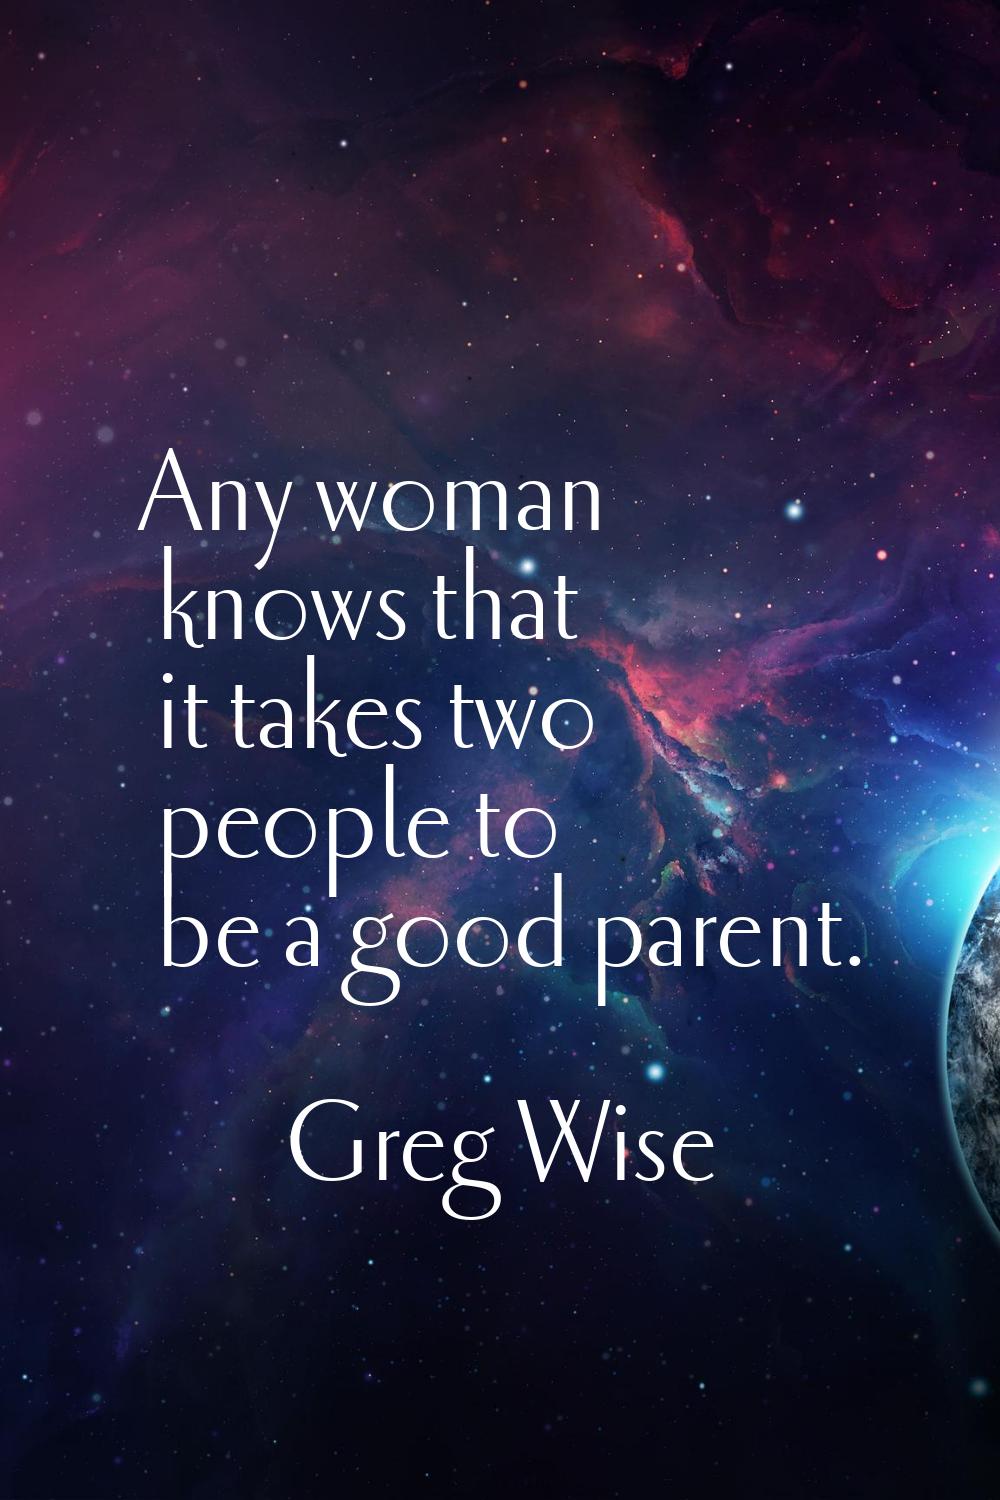 Any woman knows that it takes two people to be a good parent.